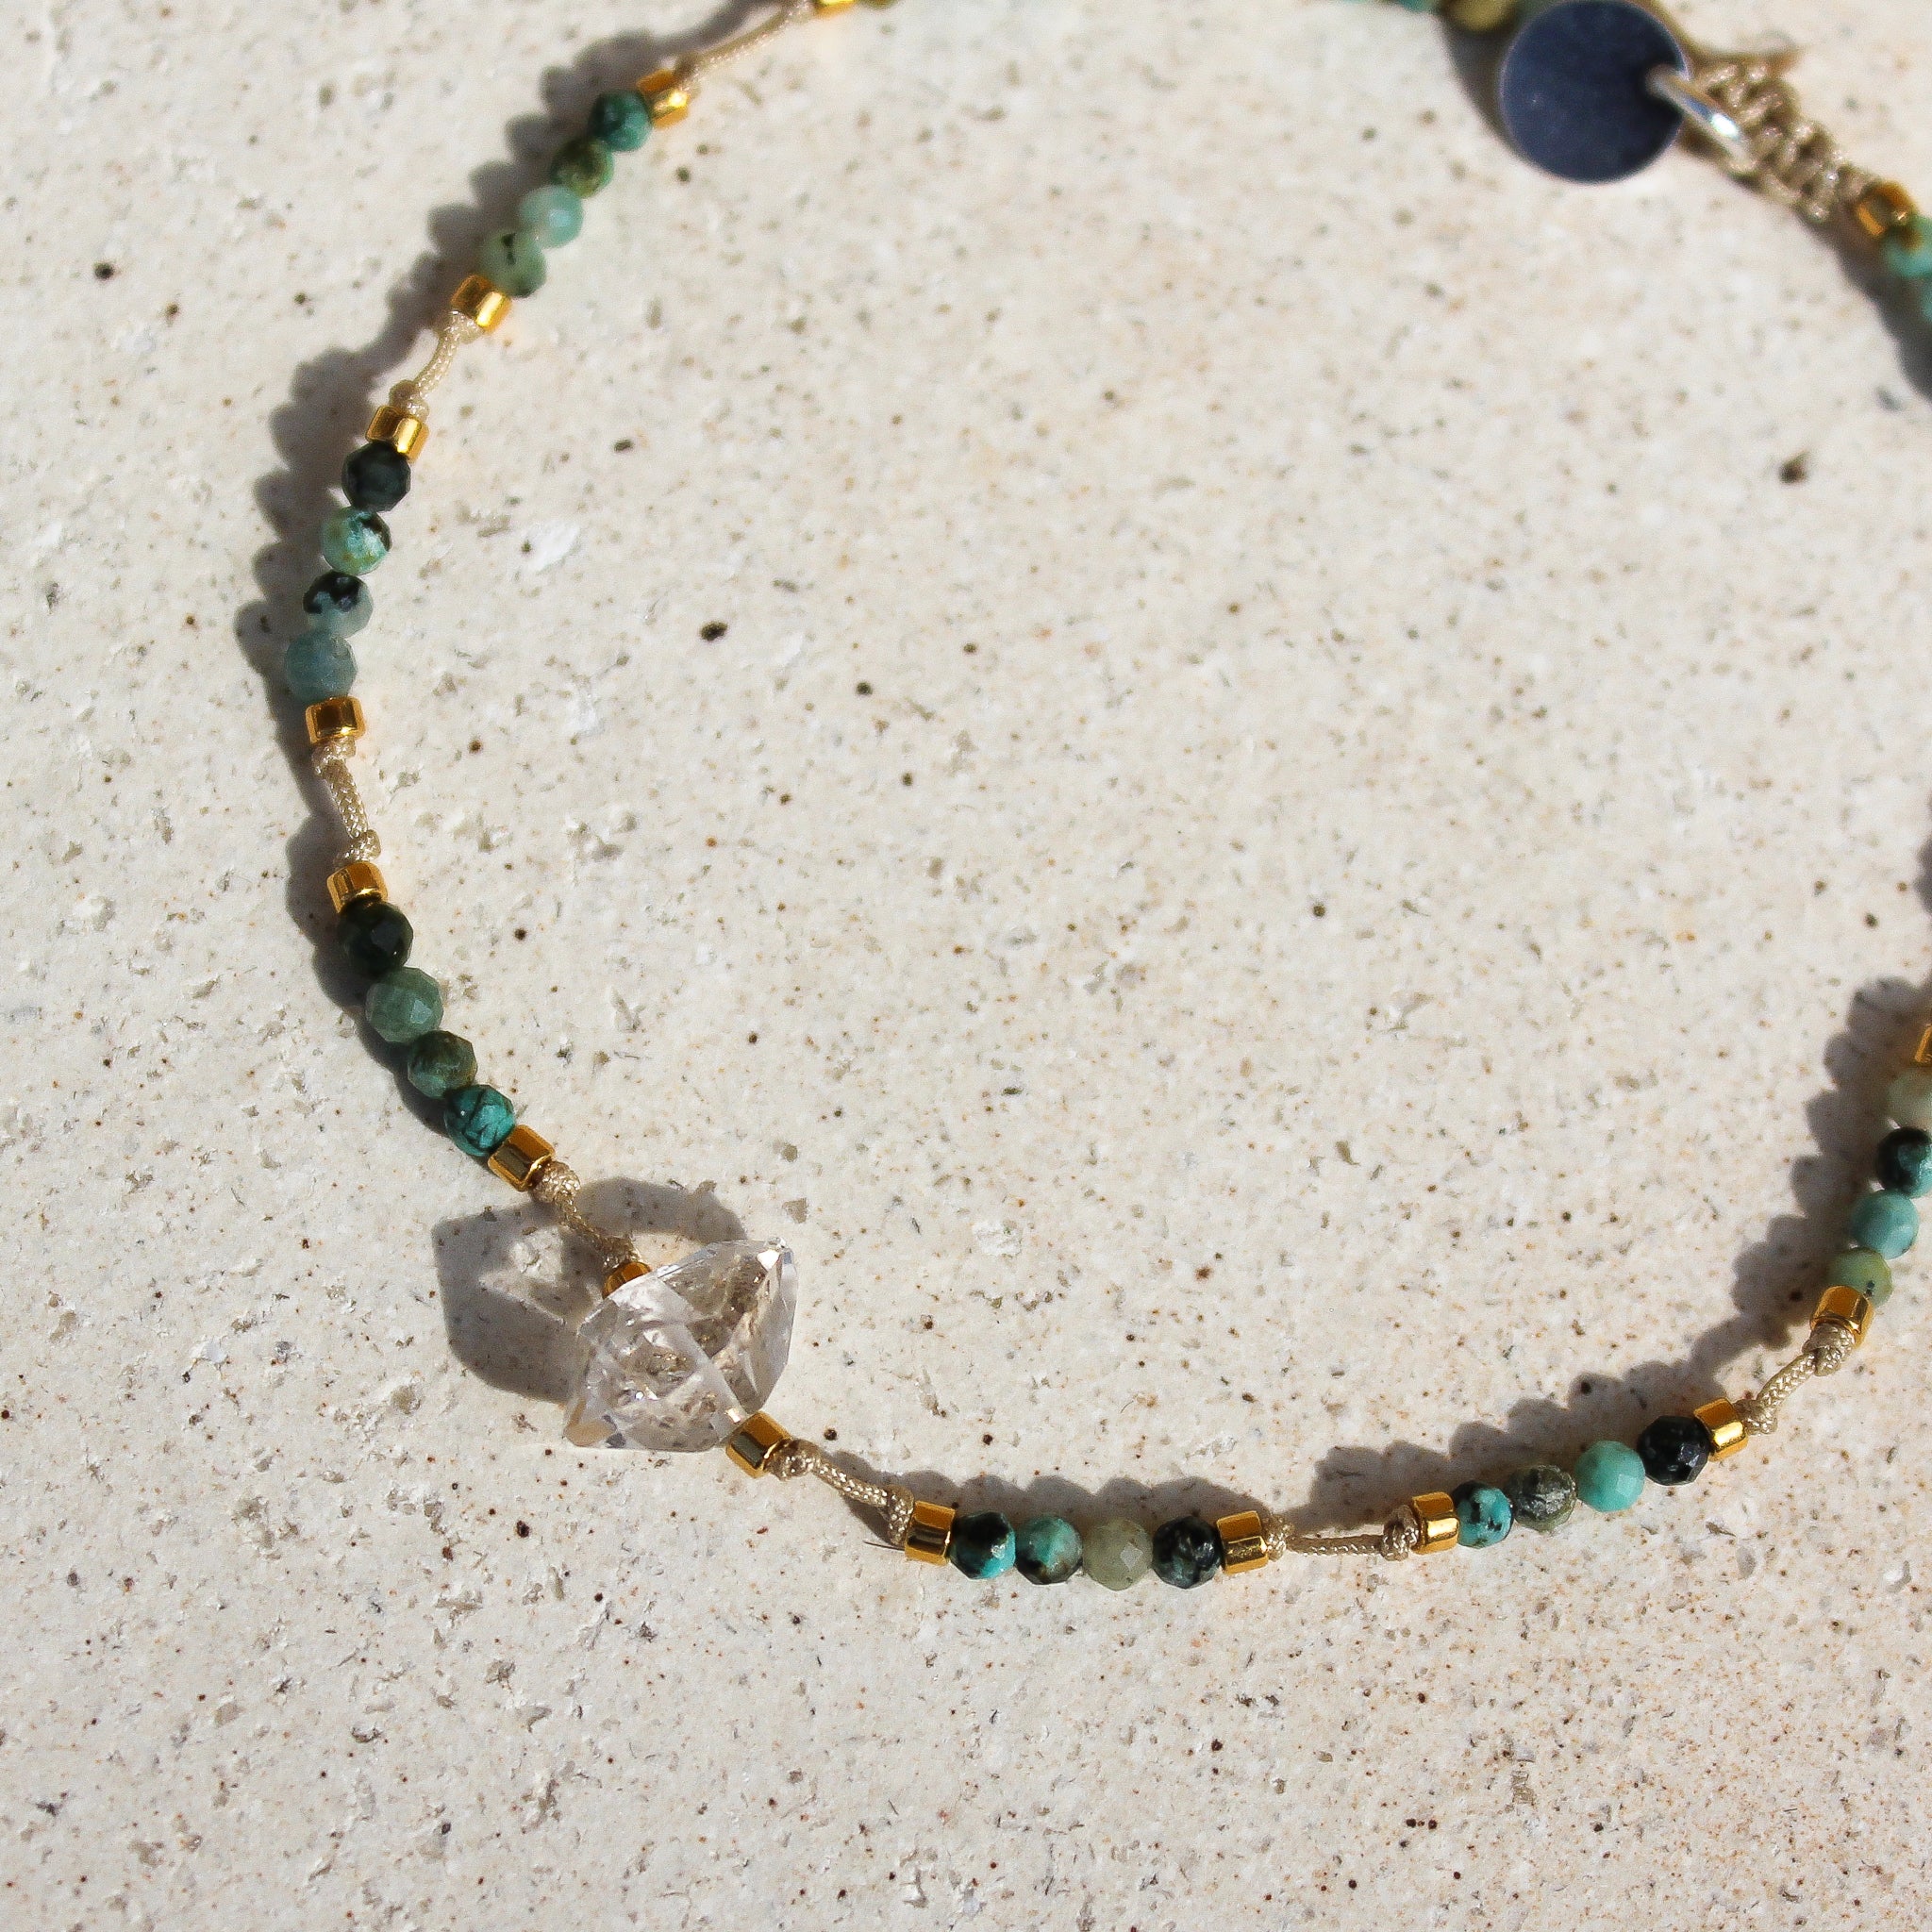 BEADS ANKLET - TURQUOISE & HERKIMER